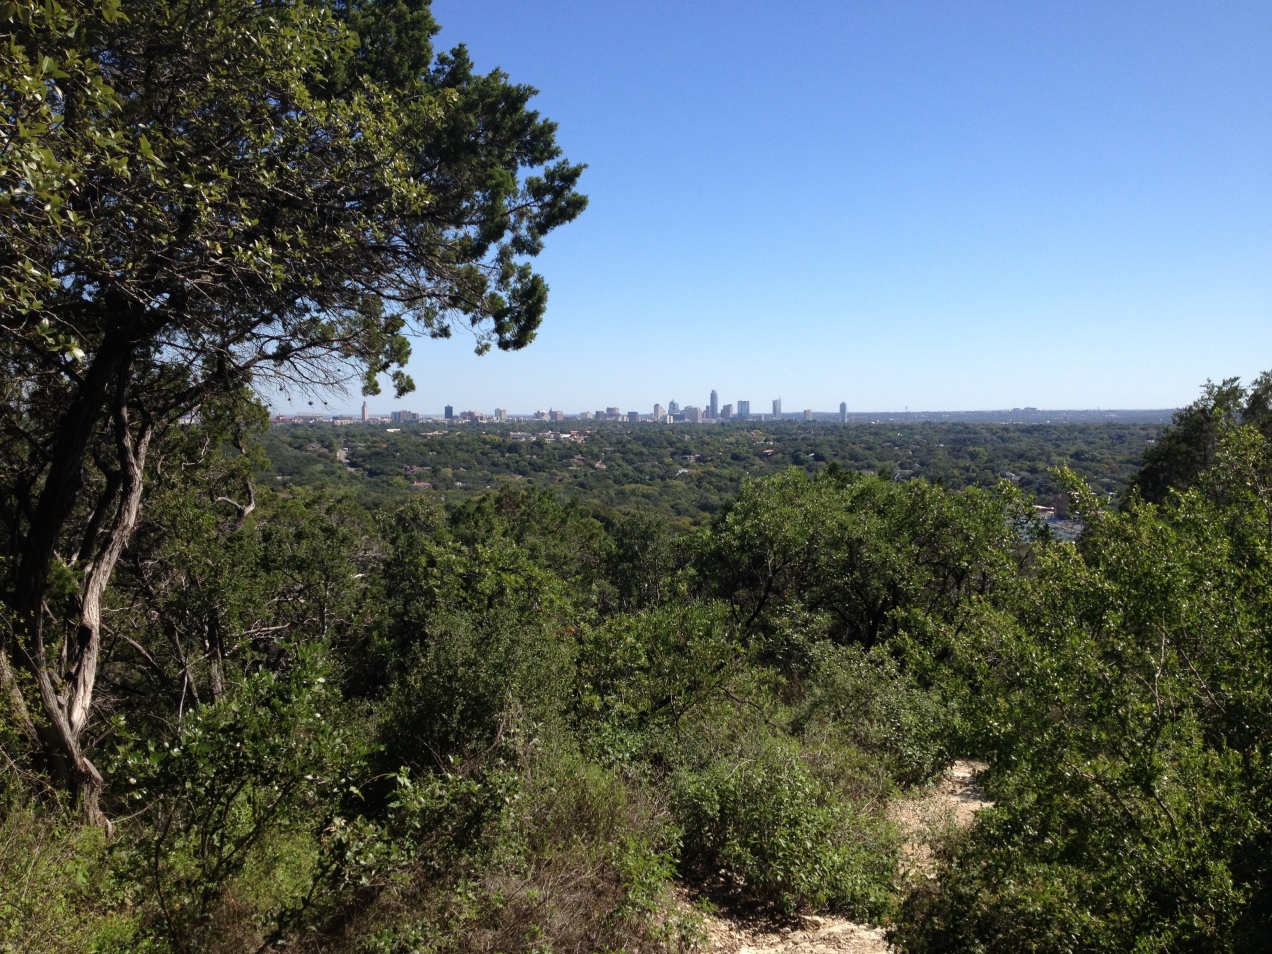 View of the Austin skyline at Mt. Bonnell